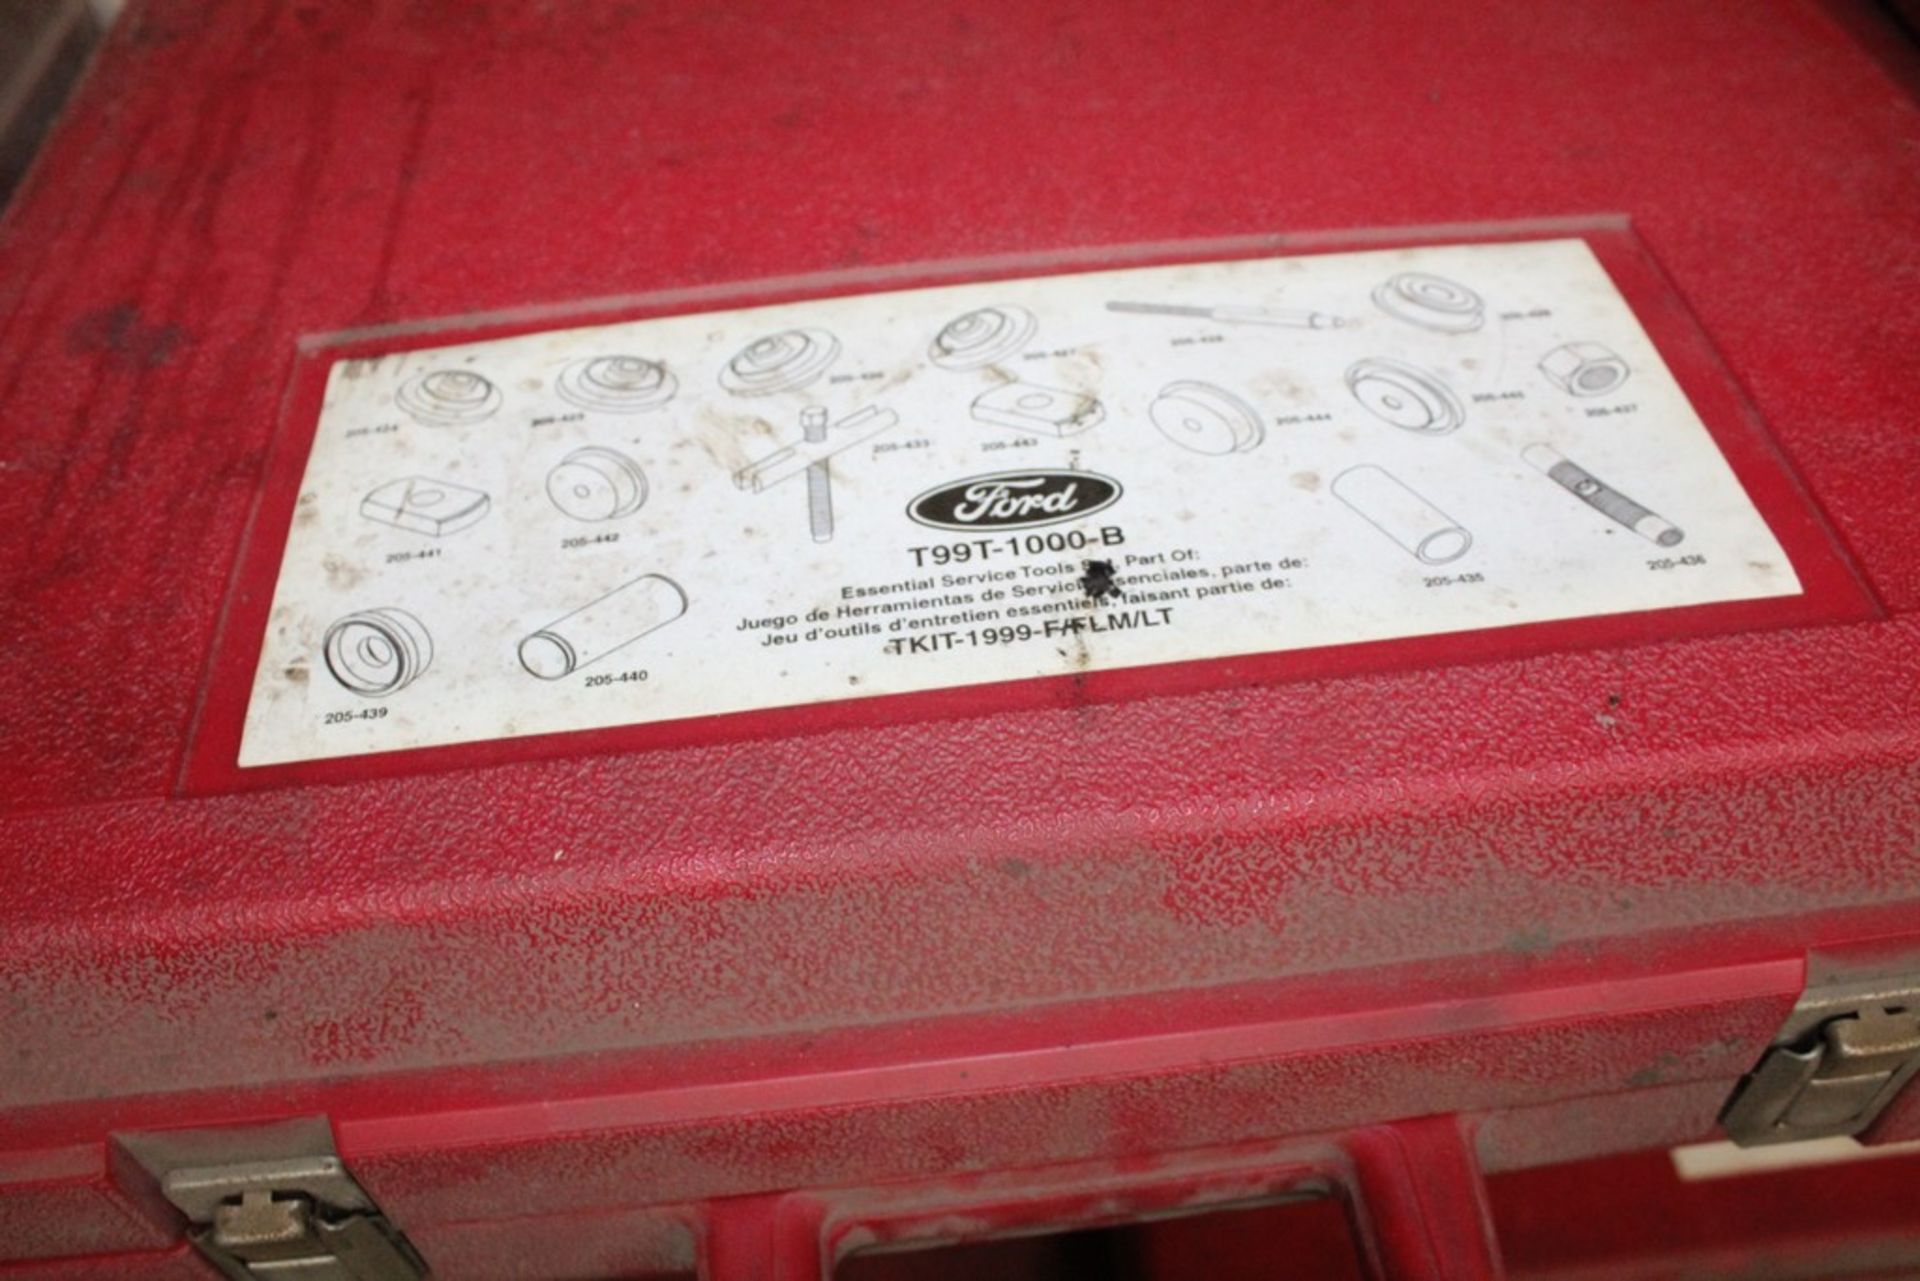 ASSORTED 1999 FORD ROTUNDA ESSENTIAL SERVICE TOOL SETS IN TWO CASES - Image 4 of 5